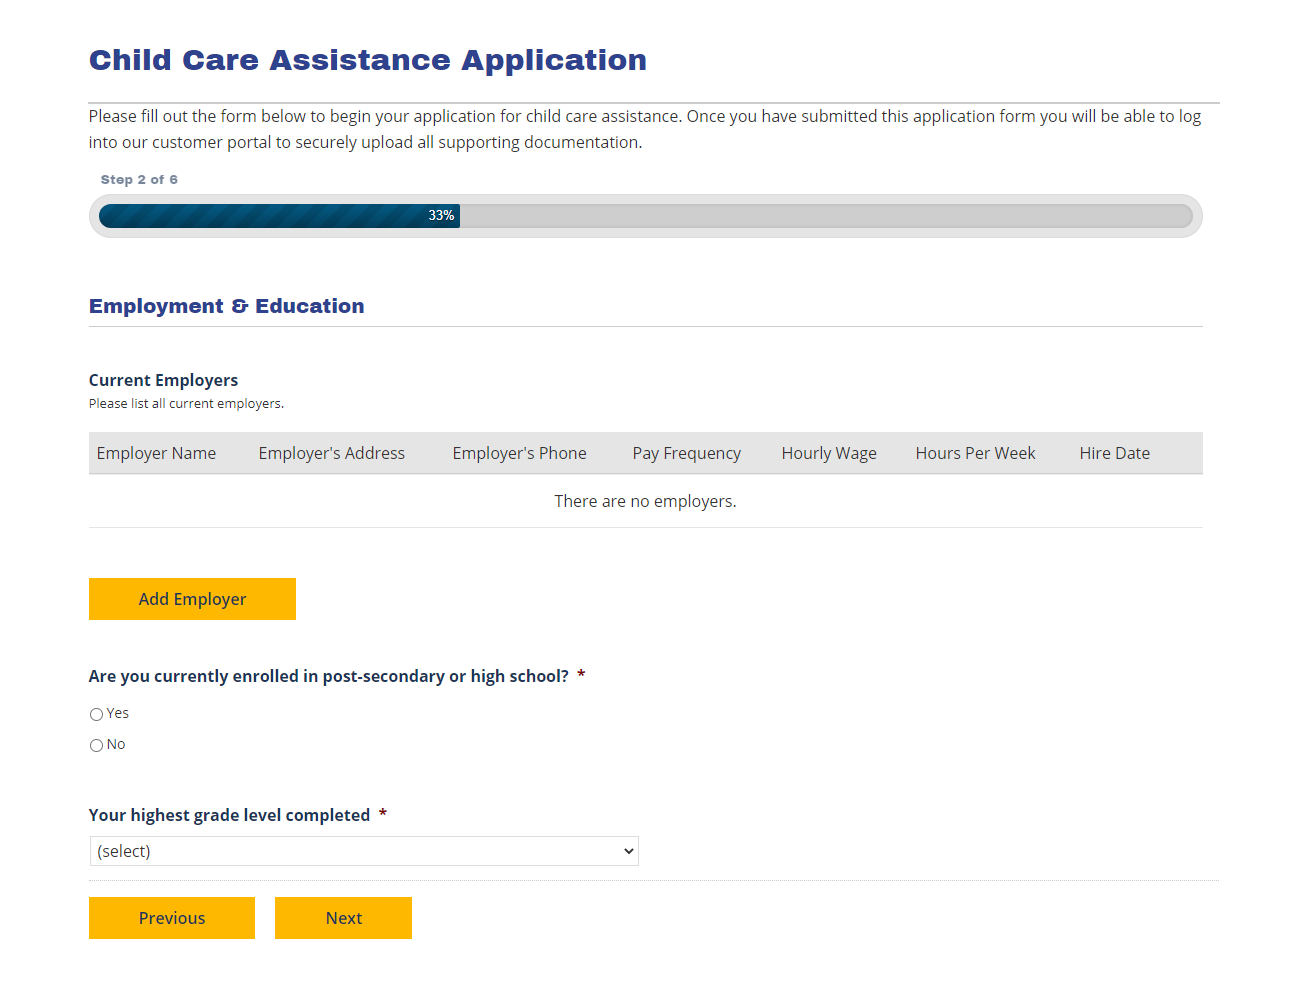 Child Care Assistance Application page 2